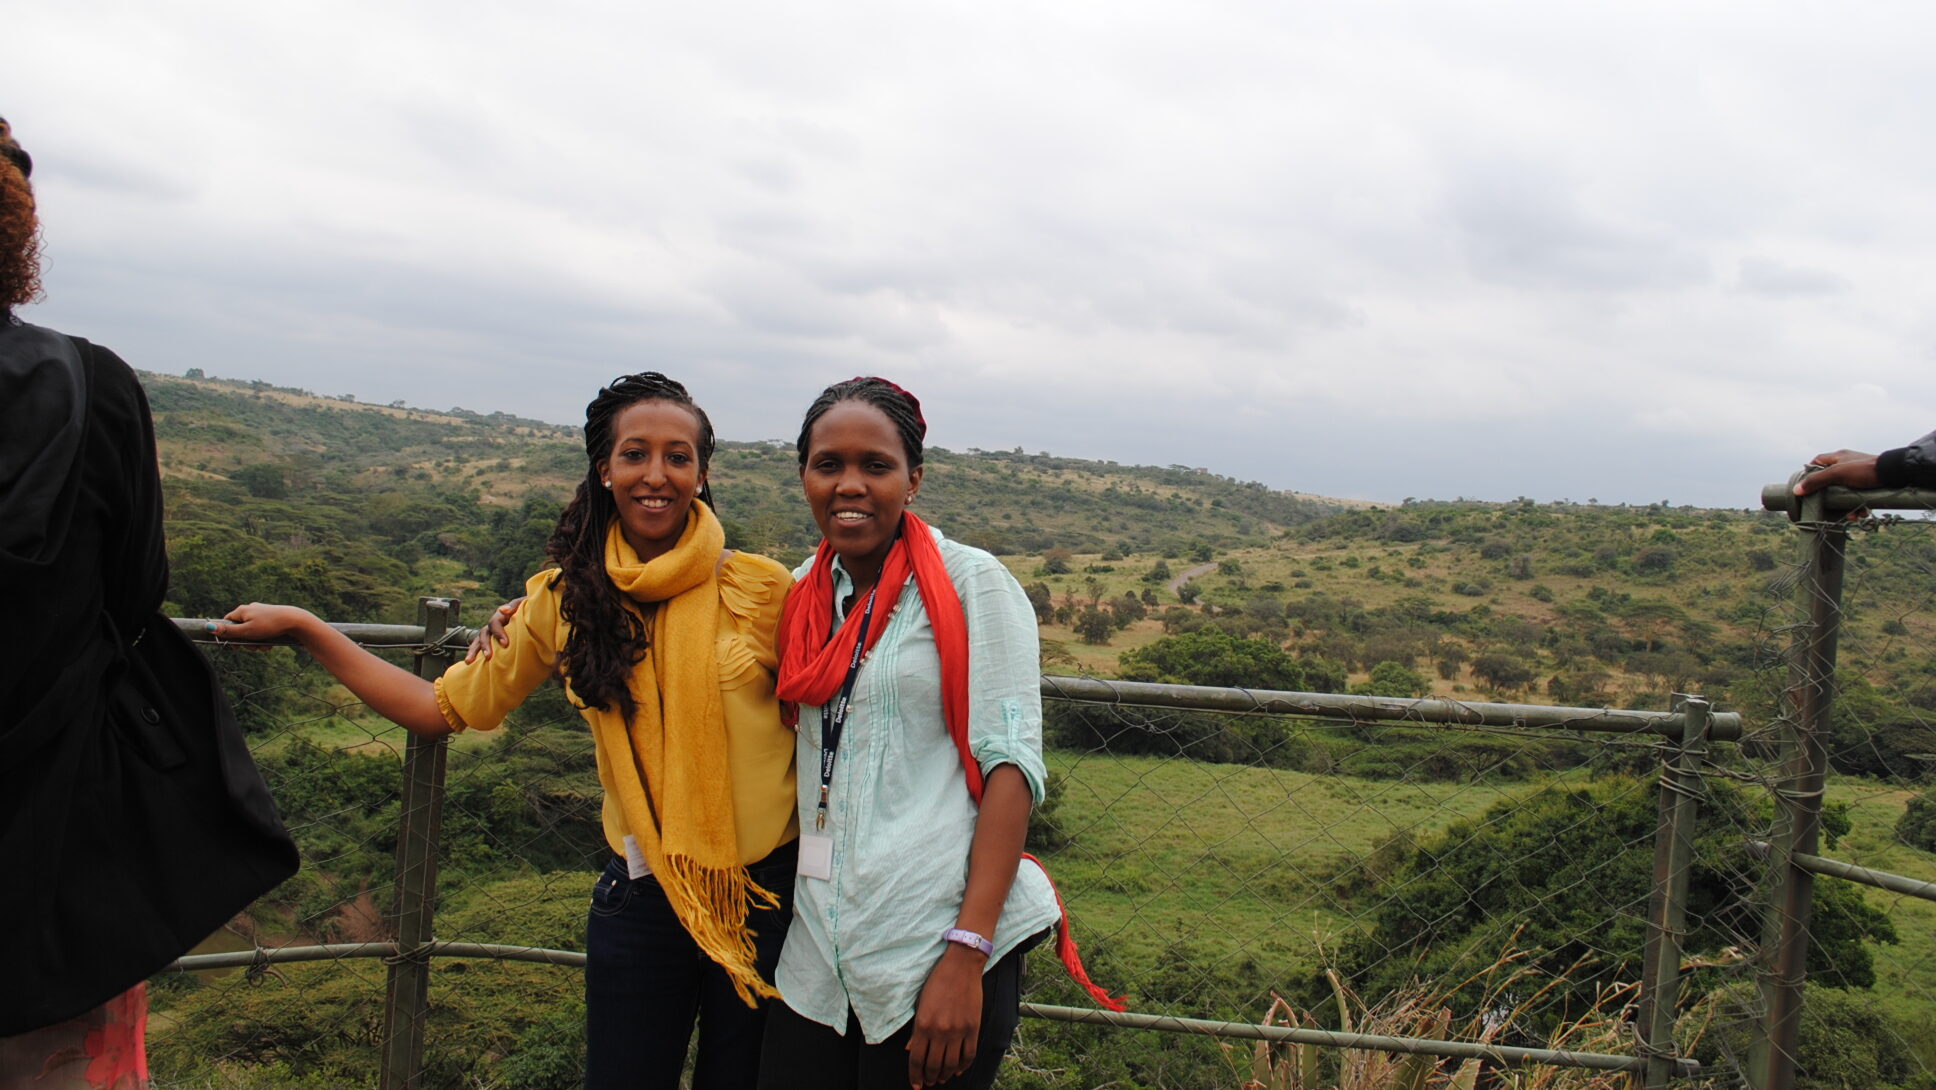 Two women pose in front a national park with trees and hills.